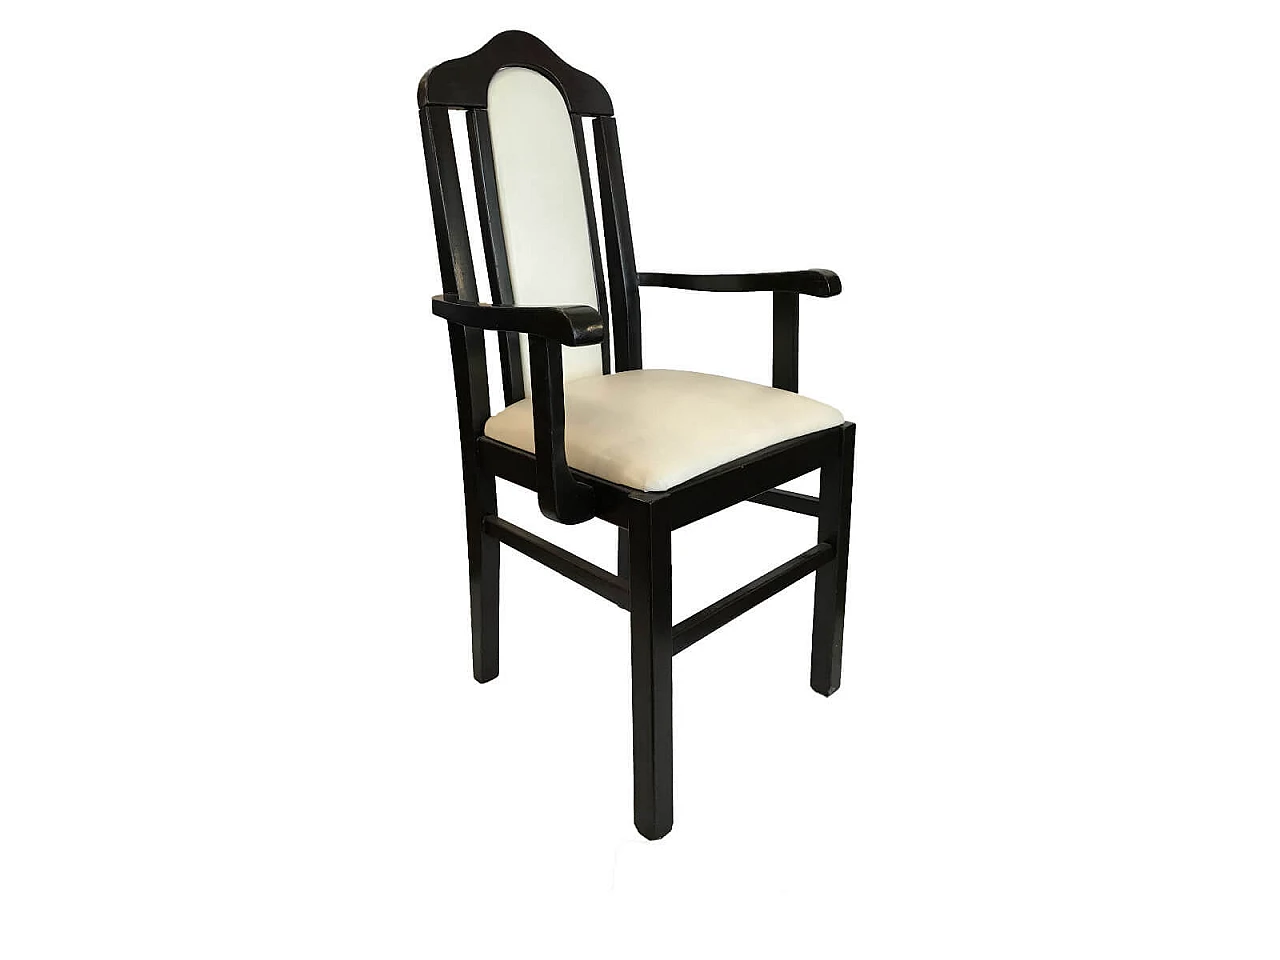 French armchair inspired by C. R. Mackintosh 1